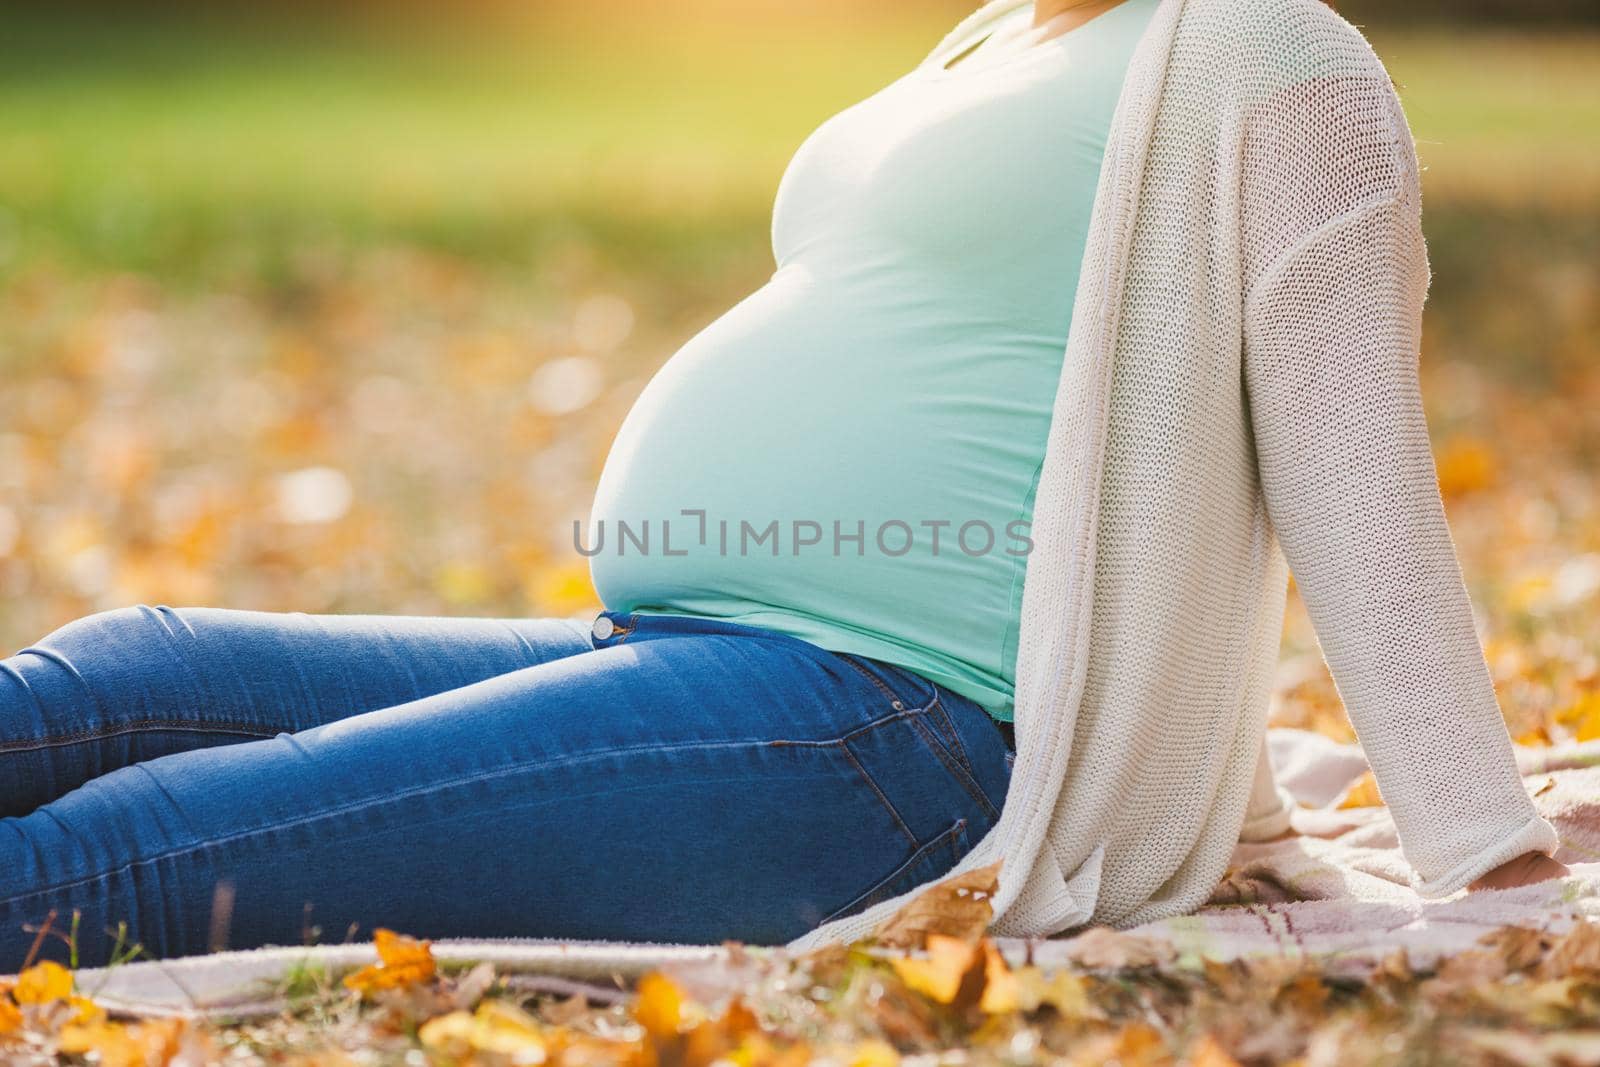 Close up of pregnant woman holding her belly in park.